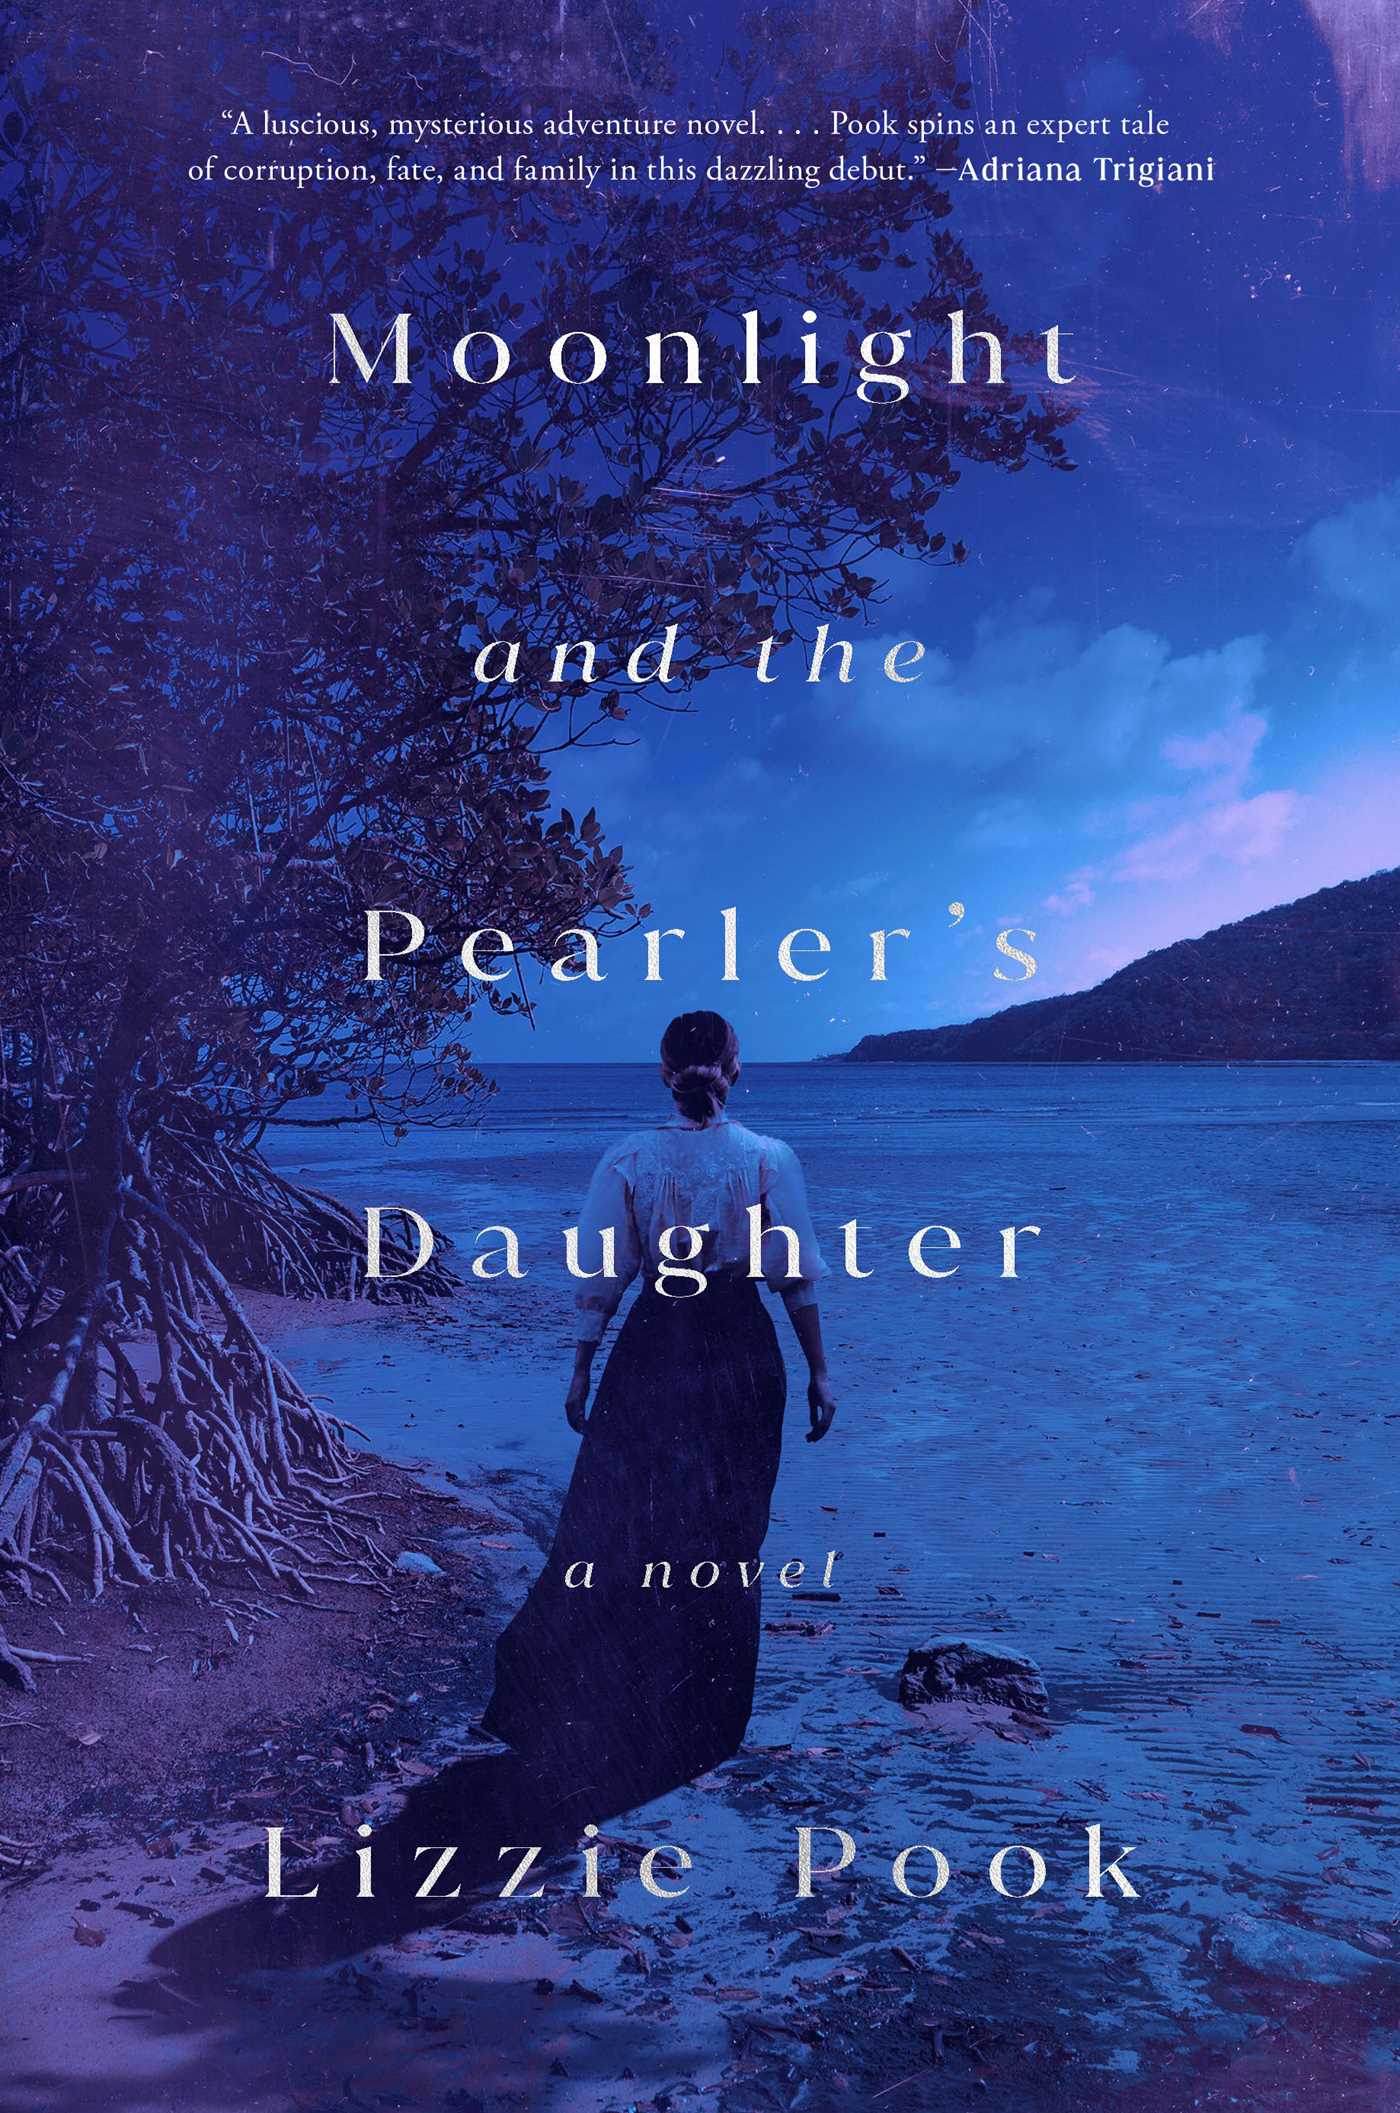 Post: Moonlight and the Pearler’s Daughter by Lizzie PookReview